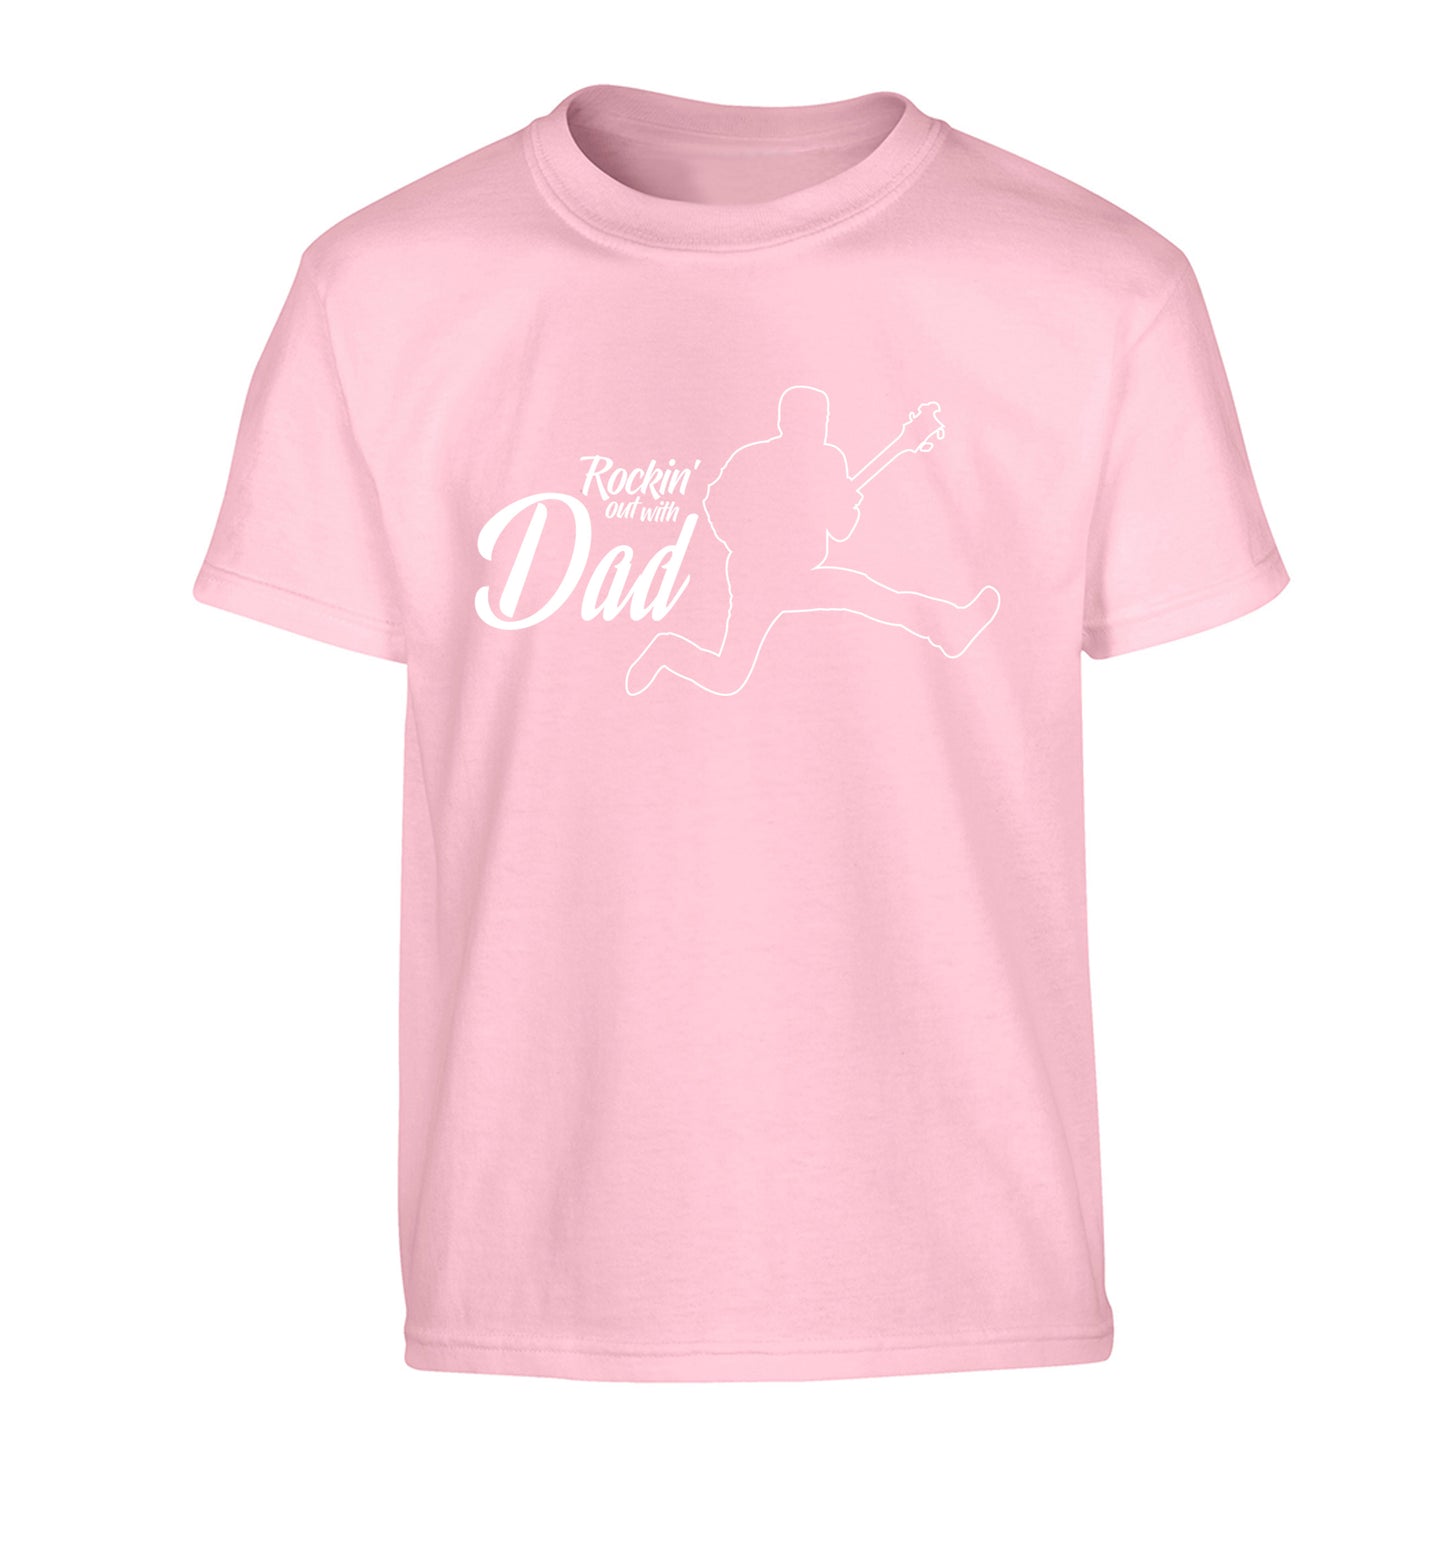 Rockin out with dad Children's light pink Tshirt 12-13 Years